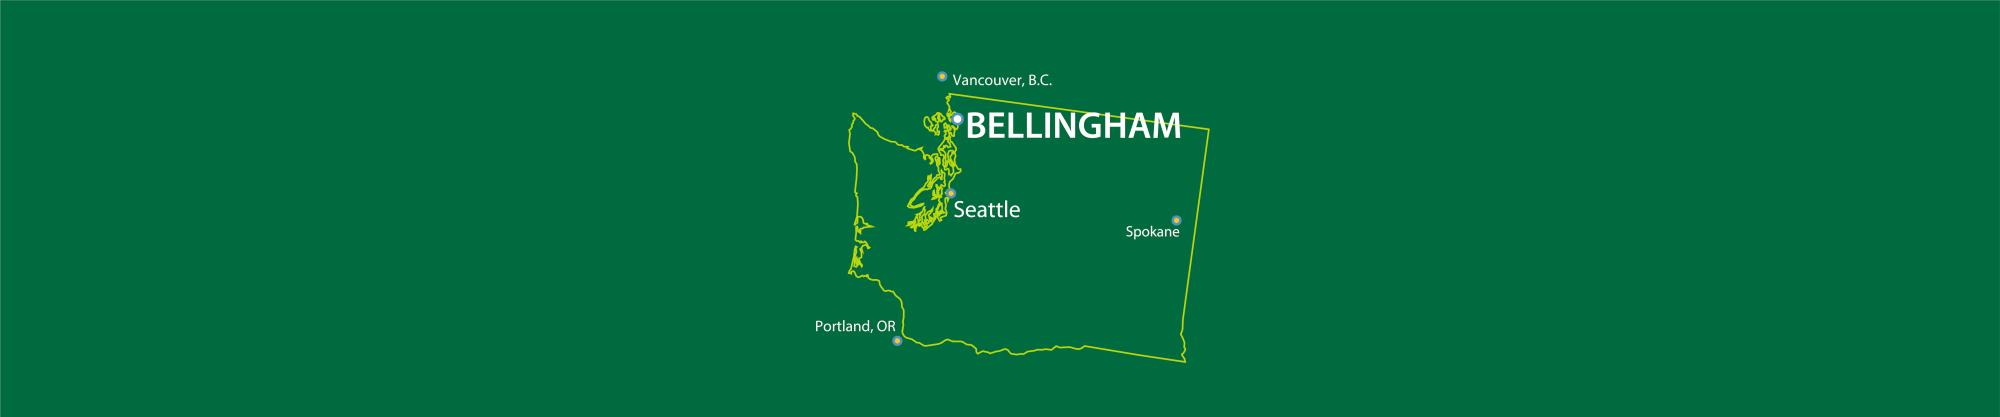 A map of Washington with Bellingham, Seattle, Vancouver BC and other major cities highlighted